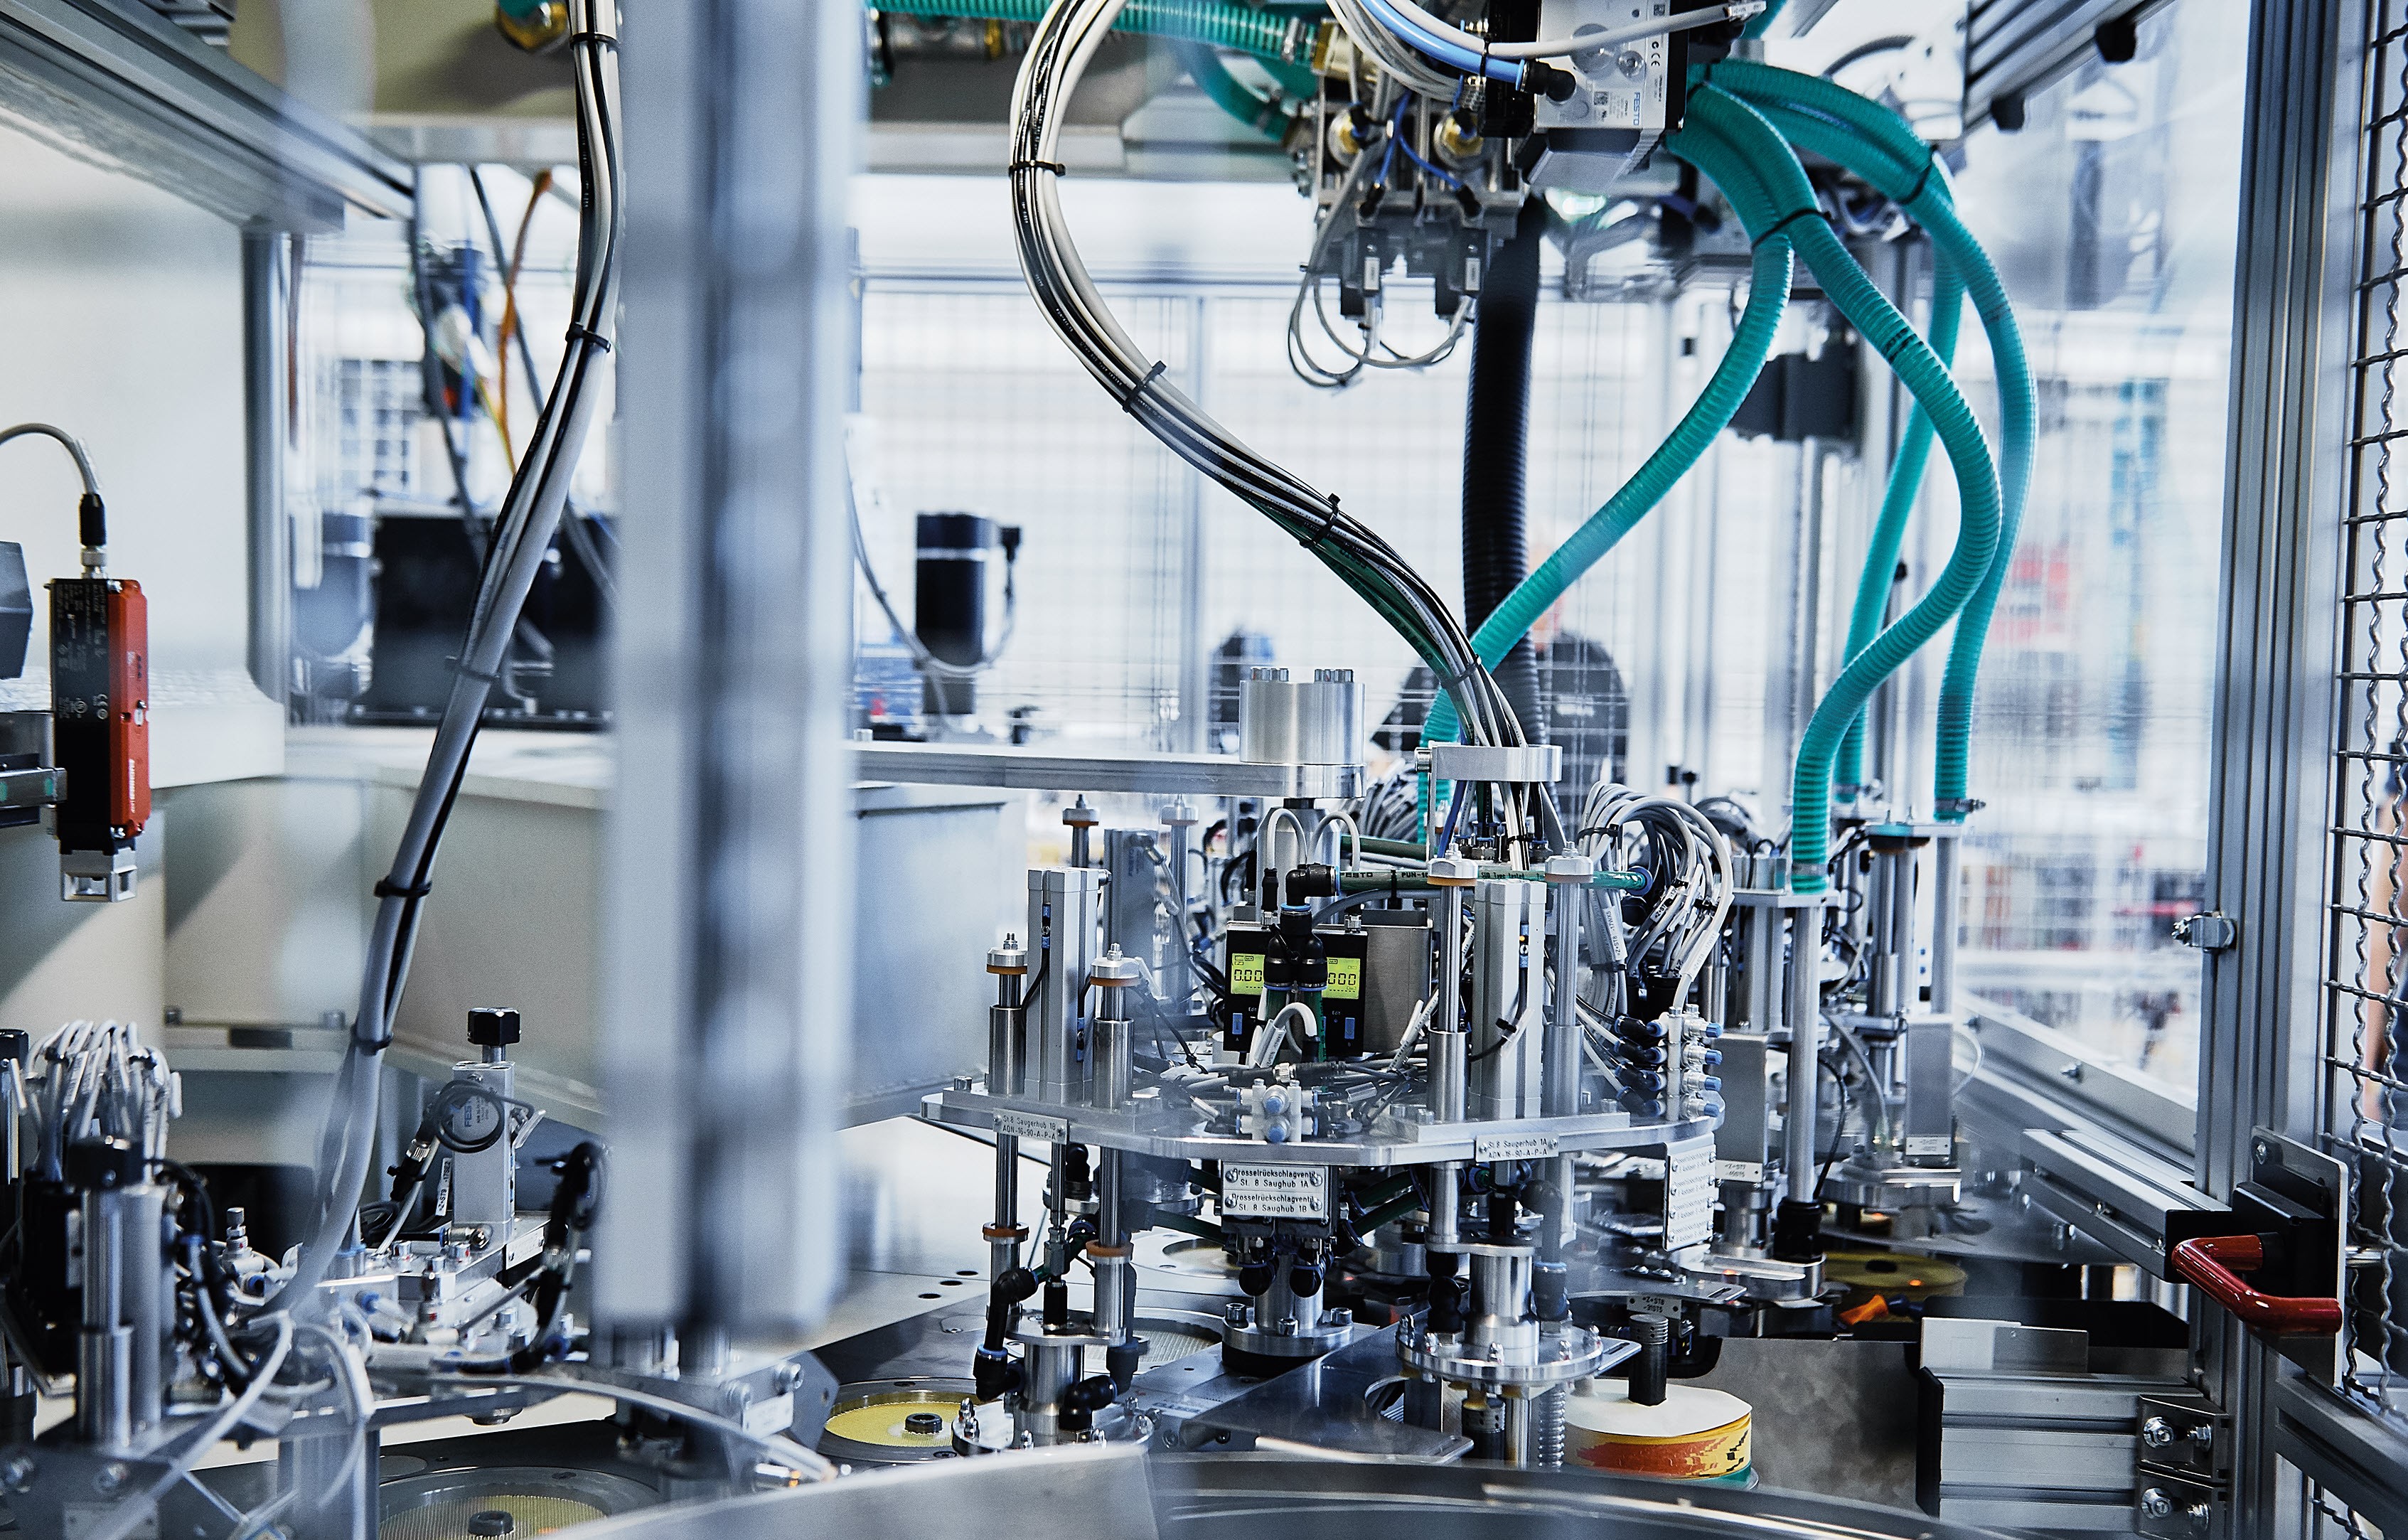 With the combined expertise of the CHIRON Group and GREIDENWEIS, process and system automation for a range of manufacturing technologies is now available from a single source.